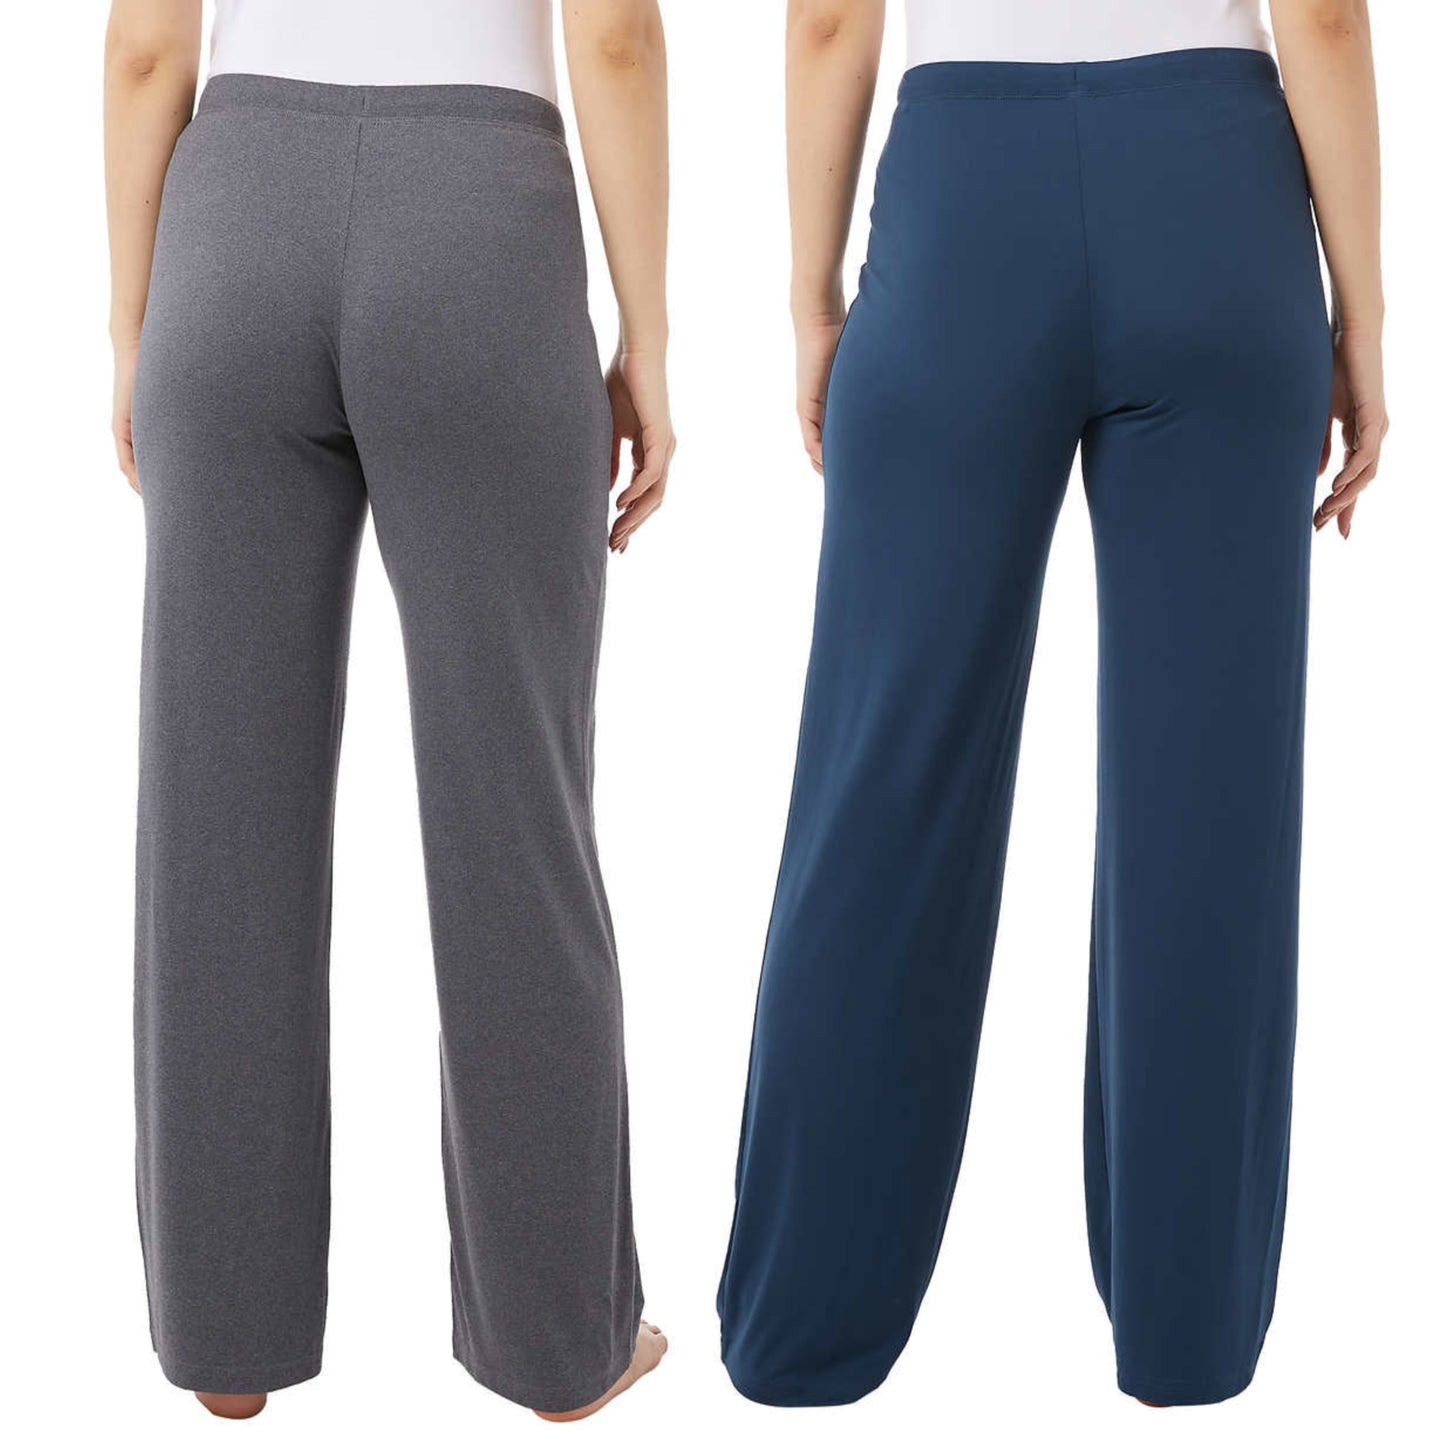 32 Degrees Women's 2-pack Super Soft Lounge Casual Pants